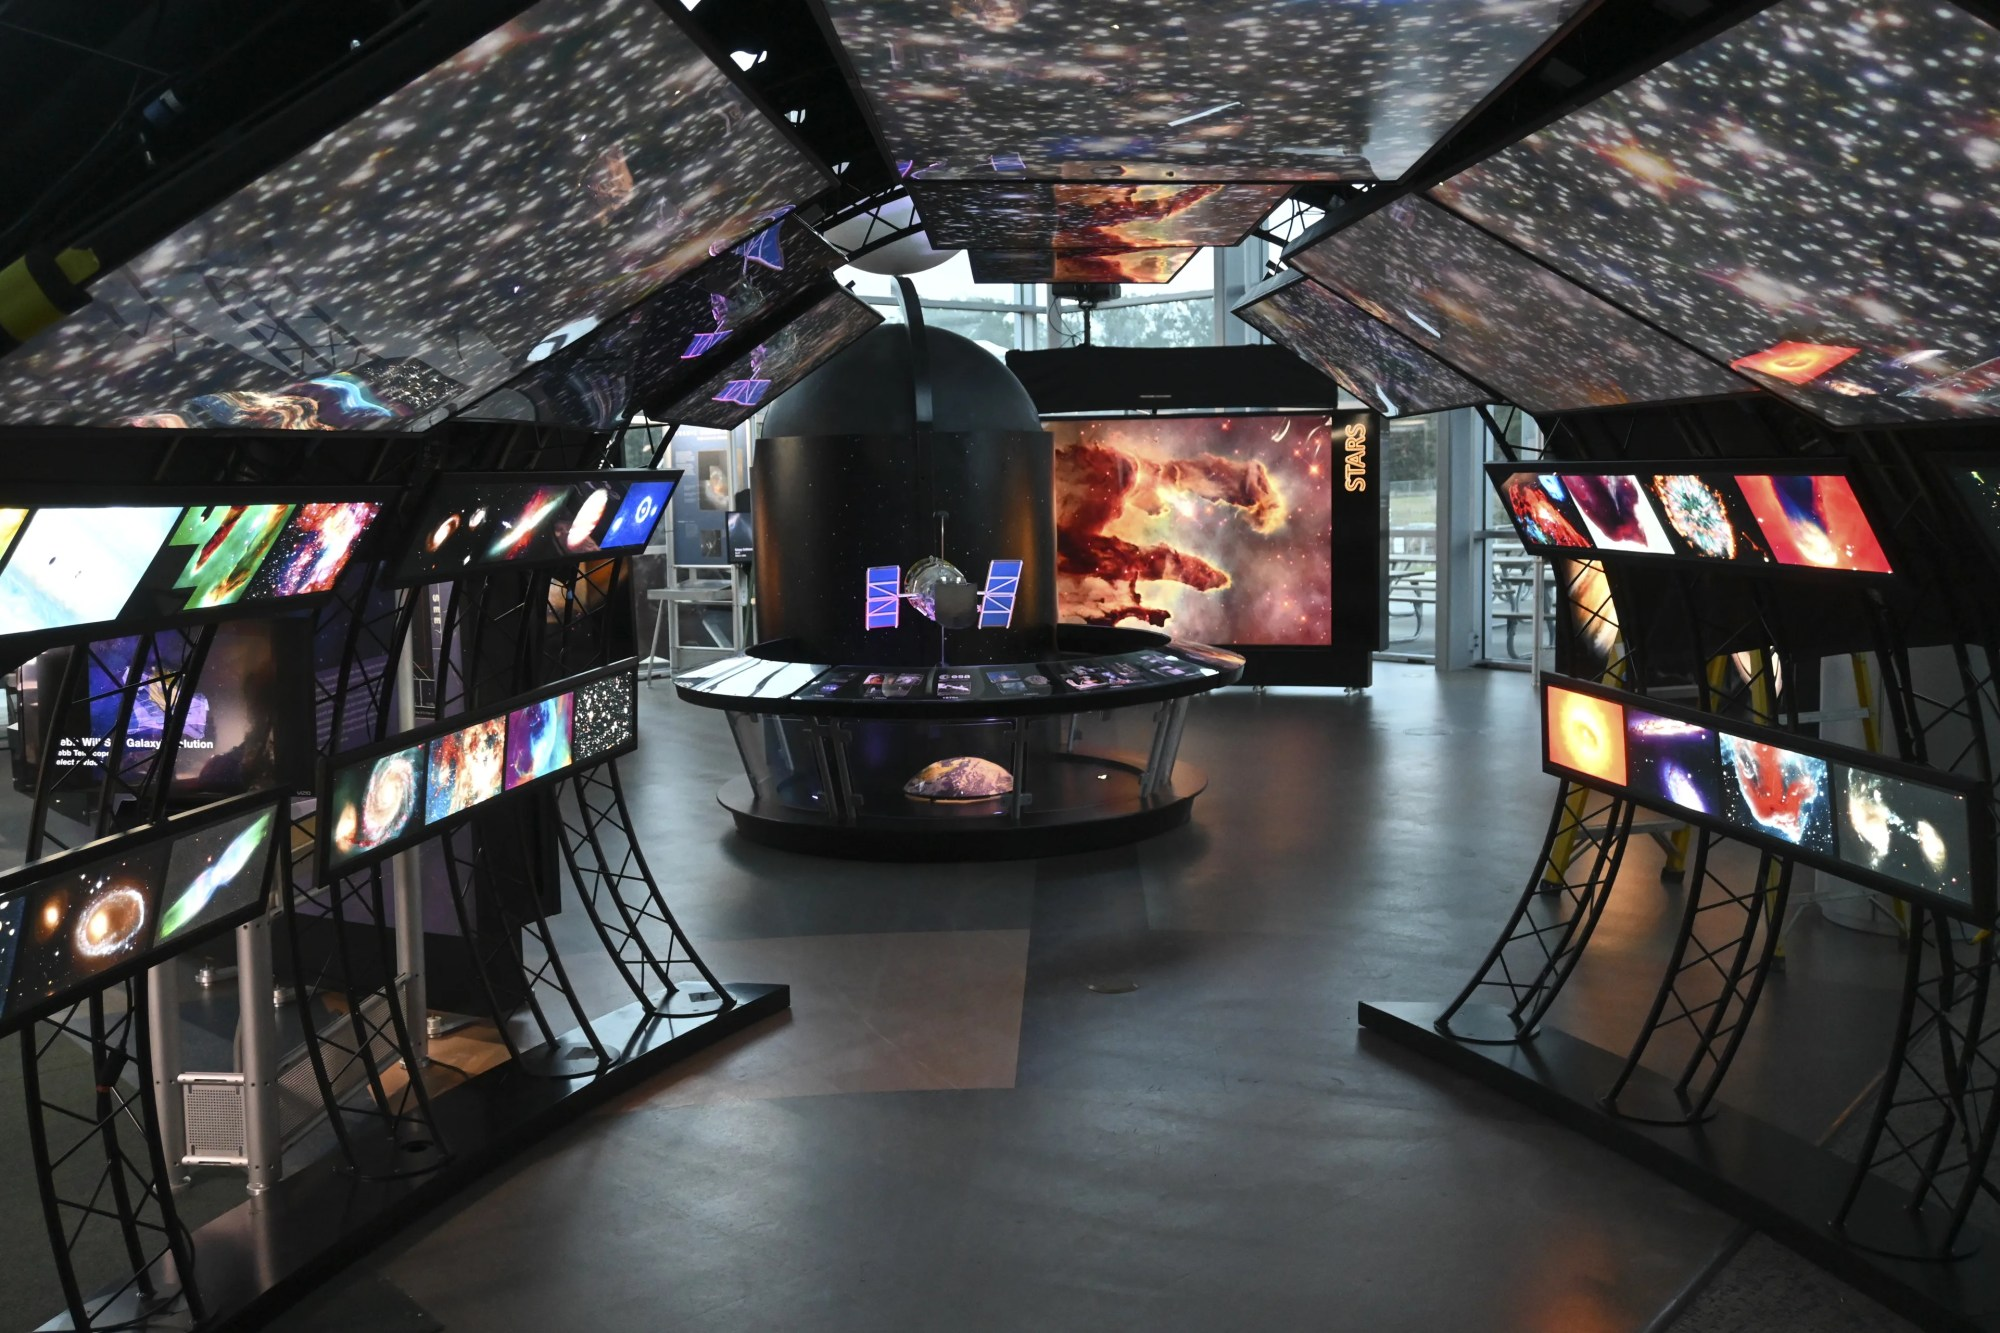 View of from within the tunnel of the Hubble exhibit. Illuminated Hubble images of galaxies and stars overhead, individual objects along the walls. Hubble Space Telescope model at the end of of the tunnel. Large illuminated Eagle Nebula image beyond.